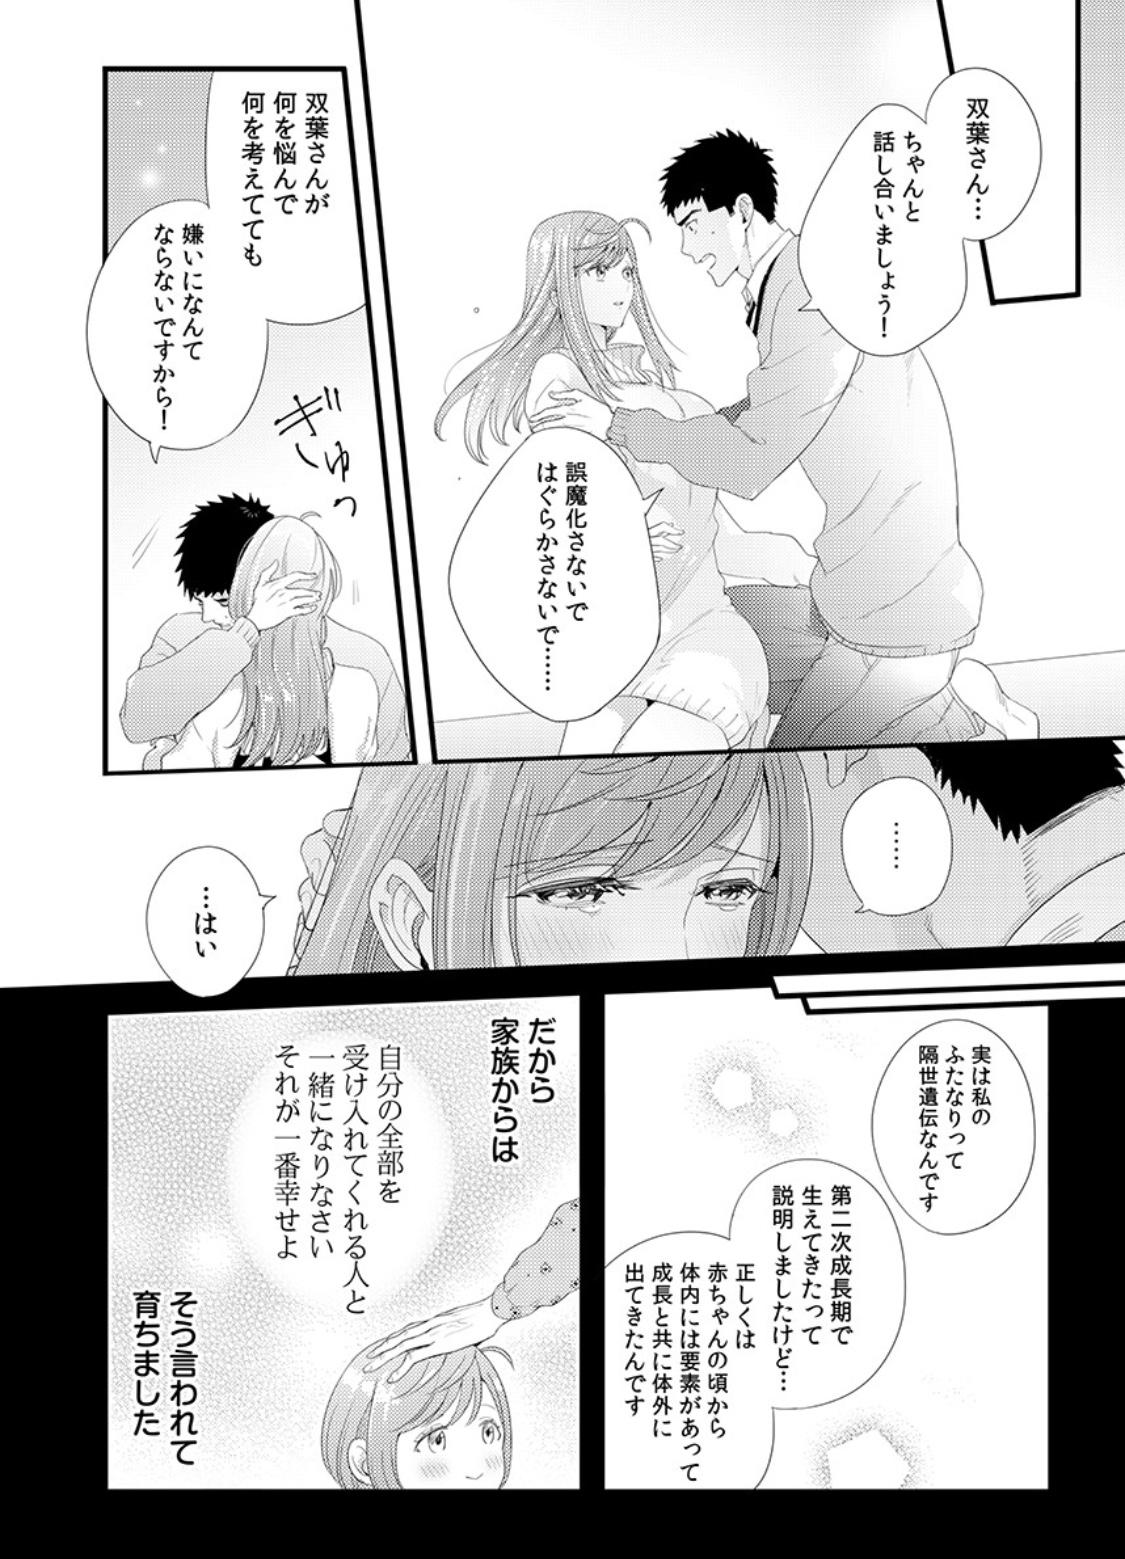 Please Let Me Hold You Futaba-San! Ch. 1+2 43